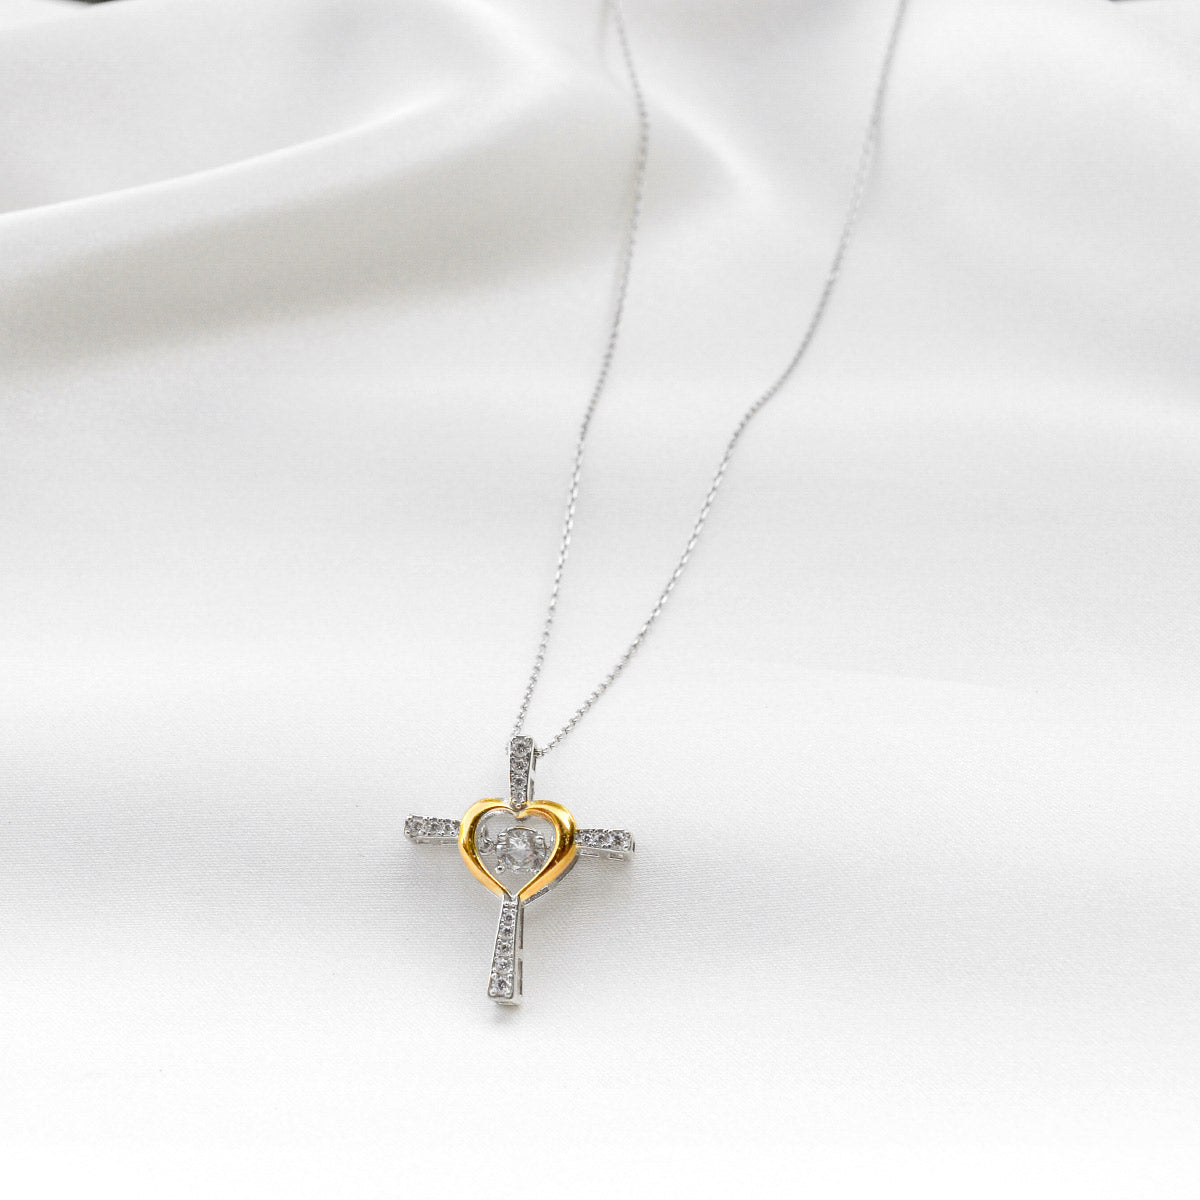 To My Daughter, You Are Amazing - Dancing Crystal Cross Necklace Gift Set